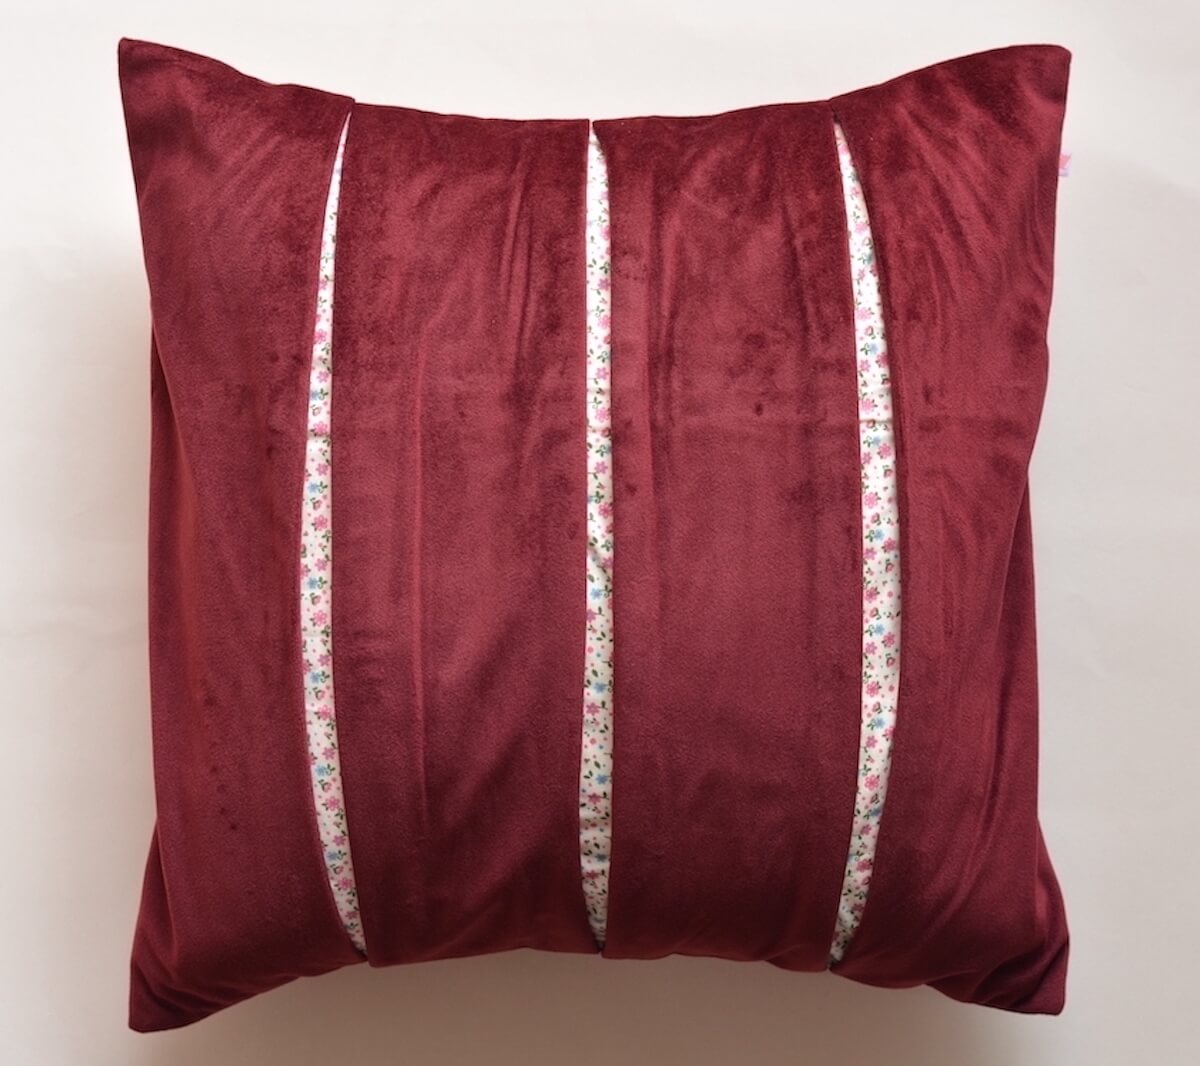 Designer Pleated Pattern Velvet & Cotton Printed Cushion Cover - Maroon, 16''x16'' Size